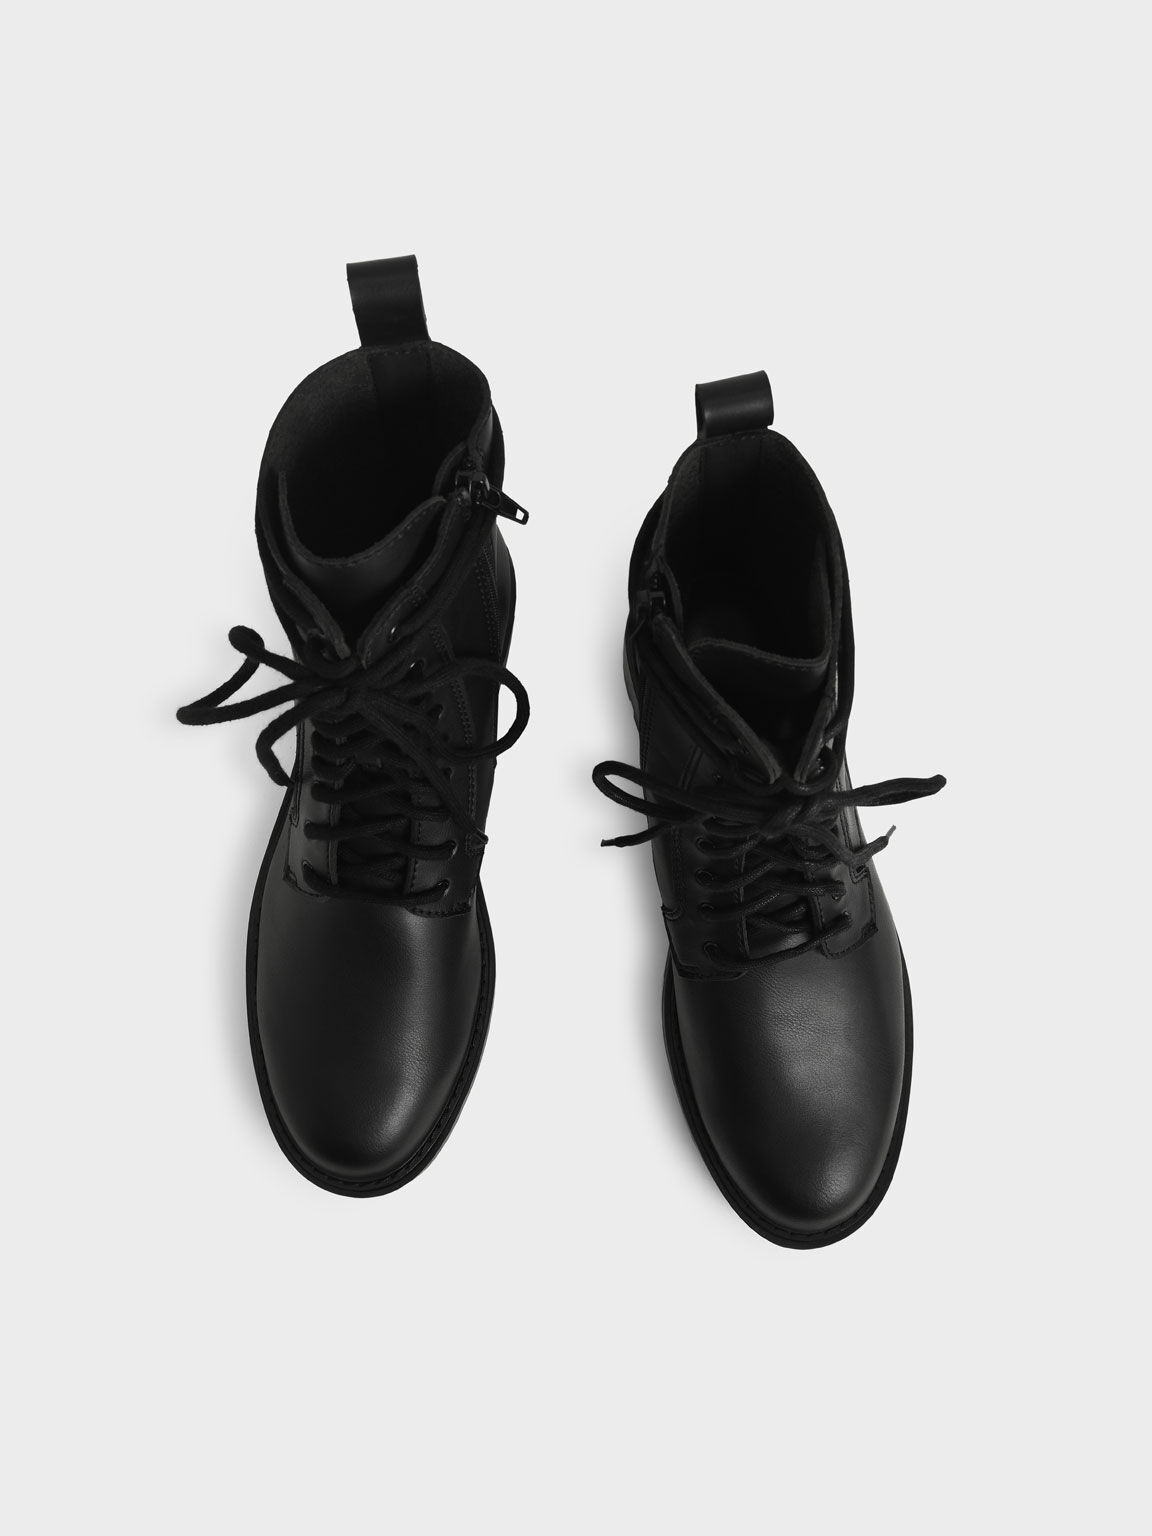 Black Gripped Soles Combat Boots - CHARLES & KEITH SG